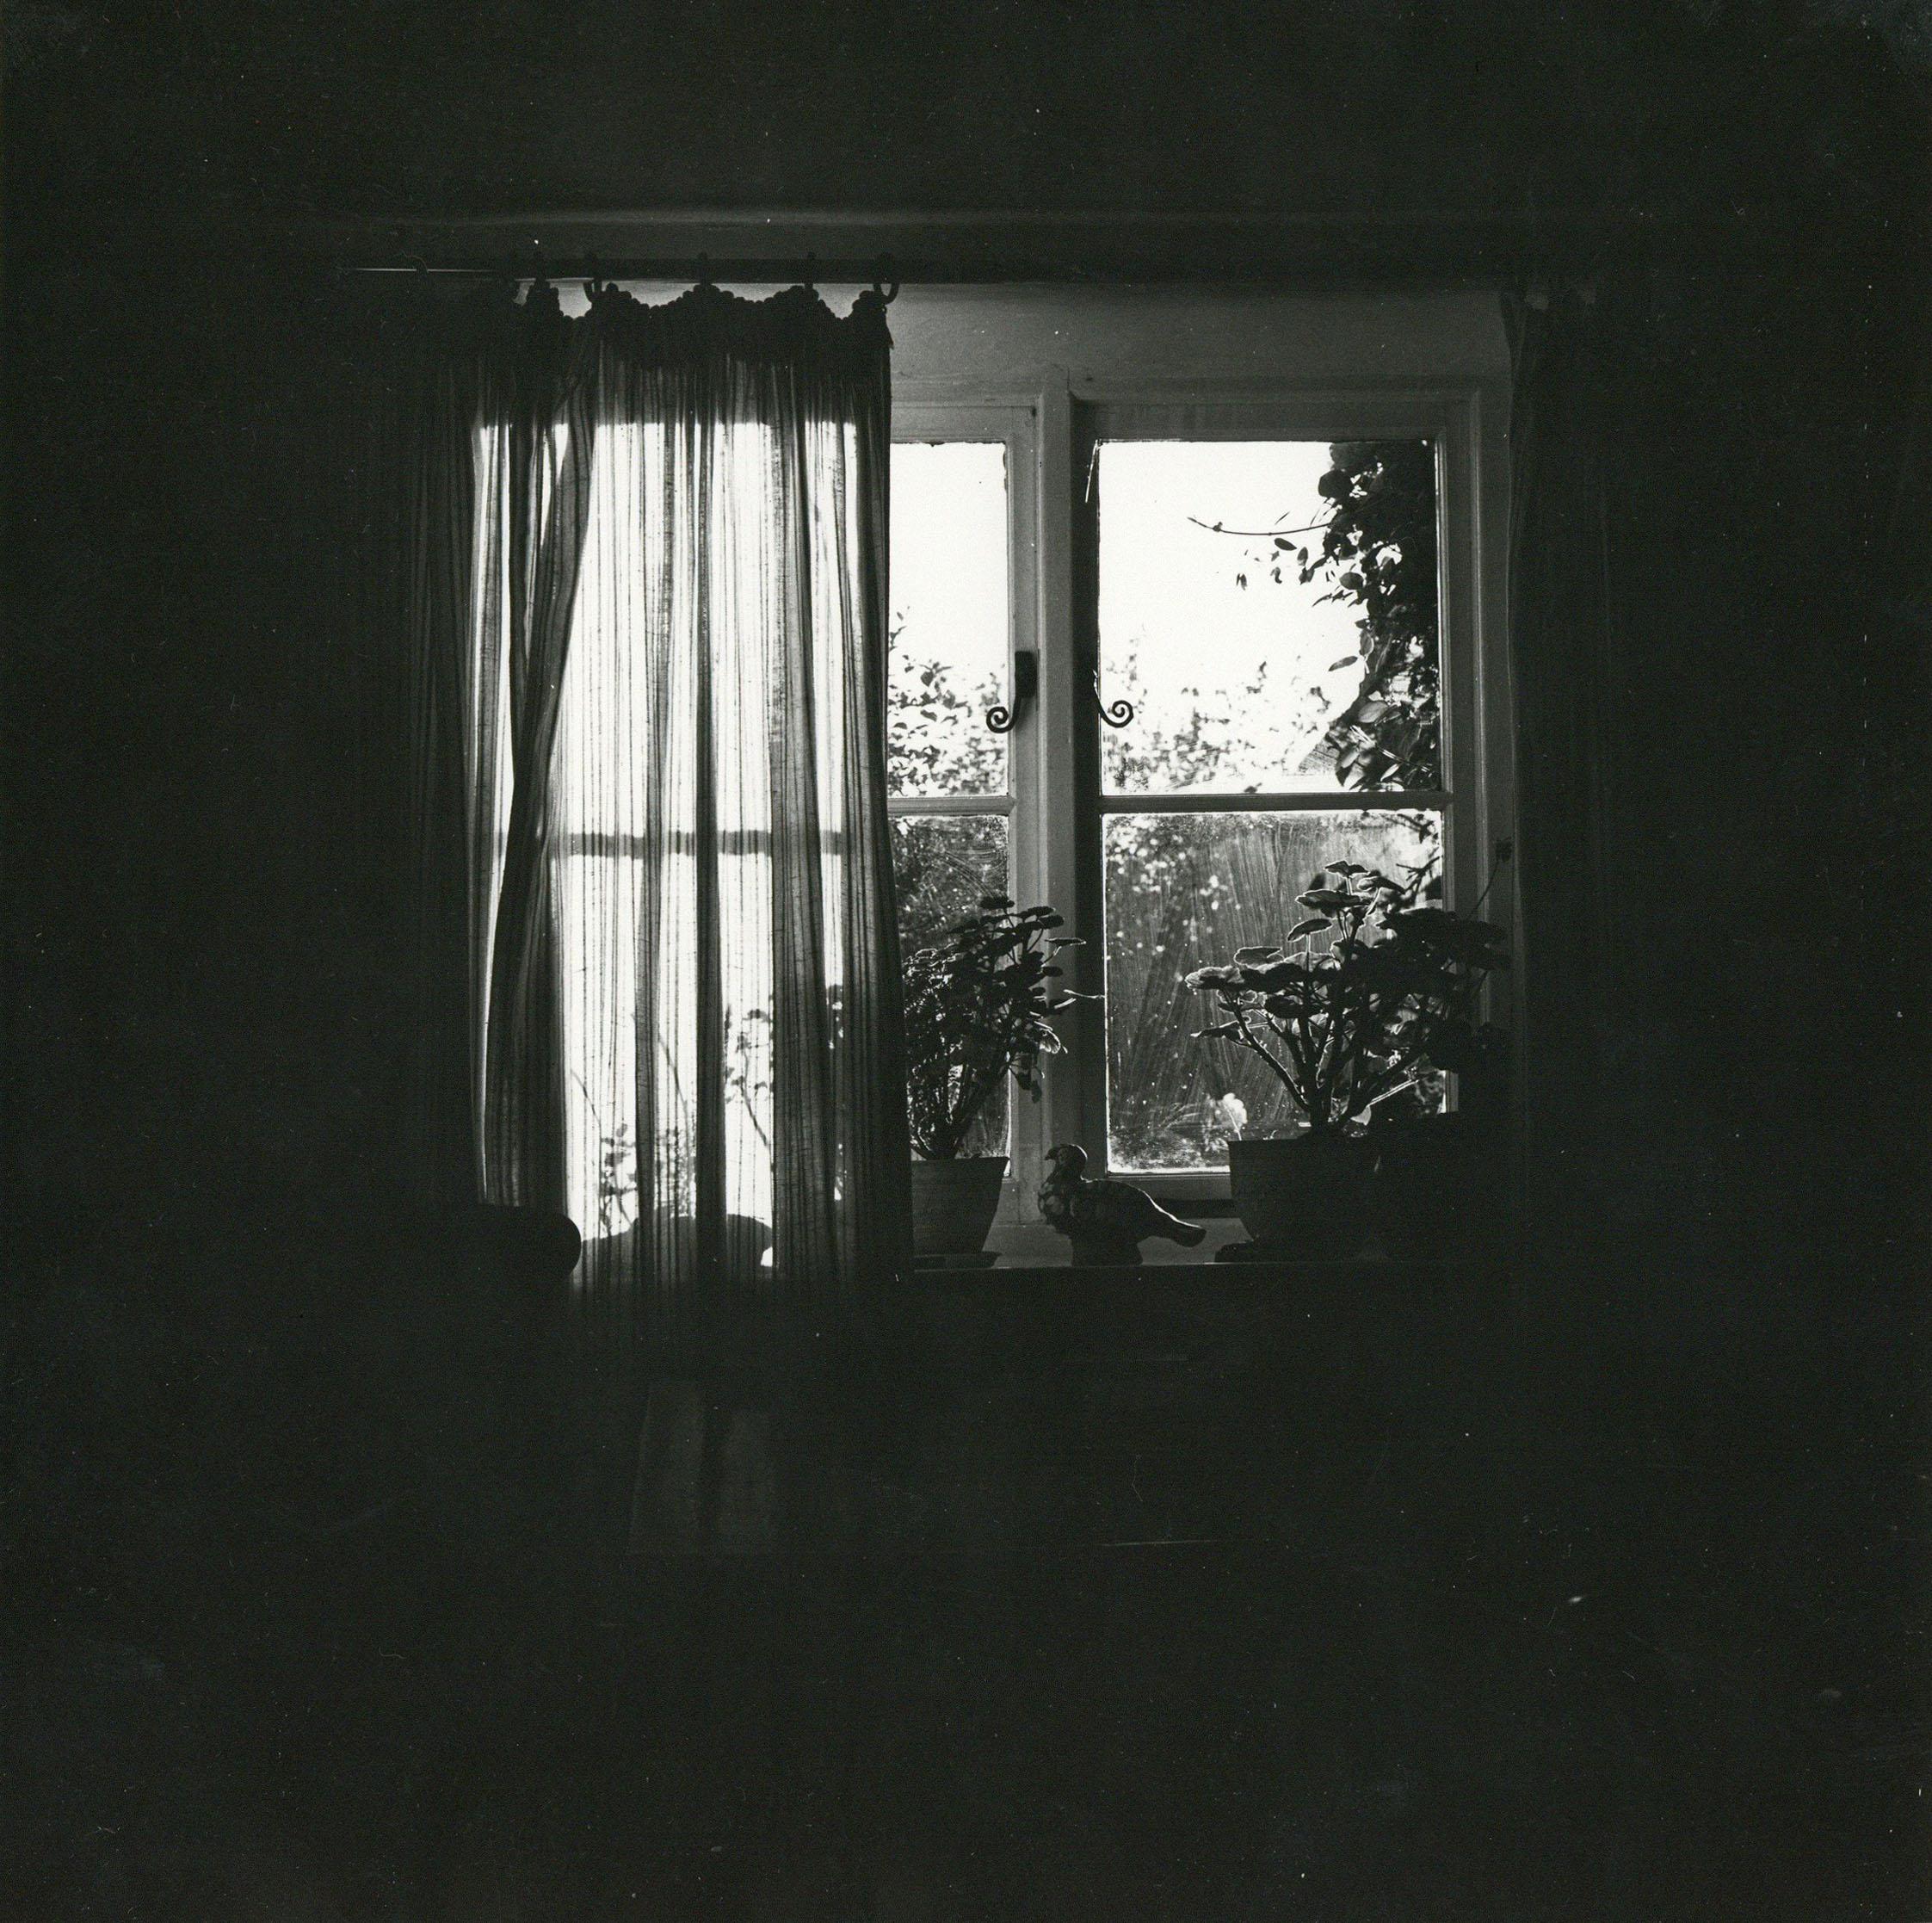 Rosemary Ellis (1910-1988)
Windows XII
Original proof photograph for Windows in the Outlooks and Insights series published by Bodley Head, by Rosemary & Charlotte Ellis.
Silver Gelatin Photograph Print
13 x 13cm

Rosemary Ellis was well known as a